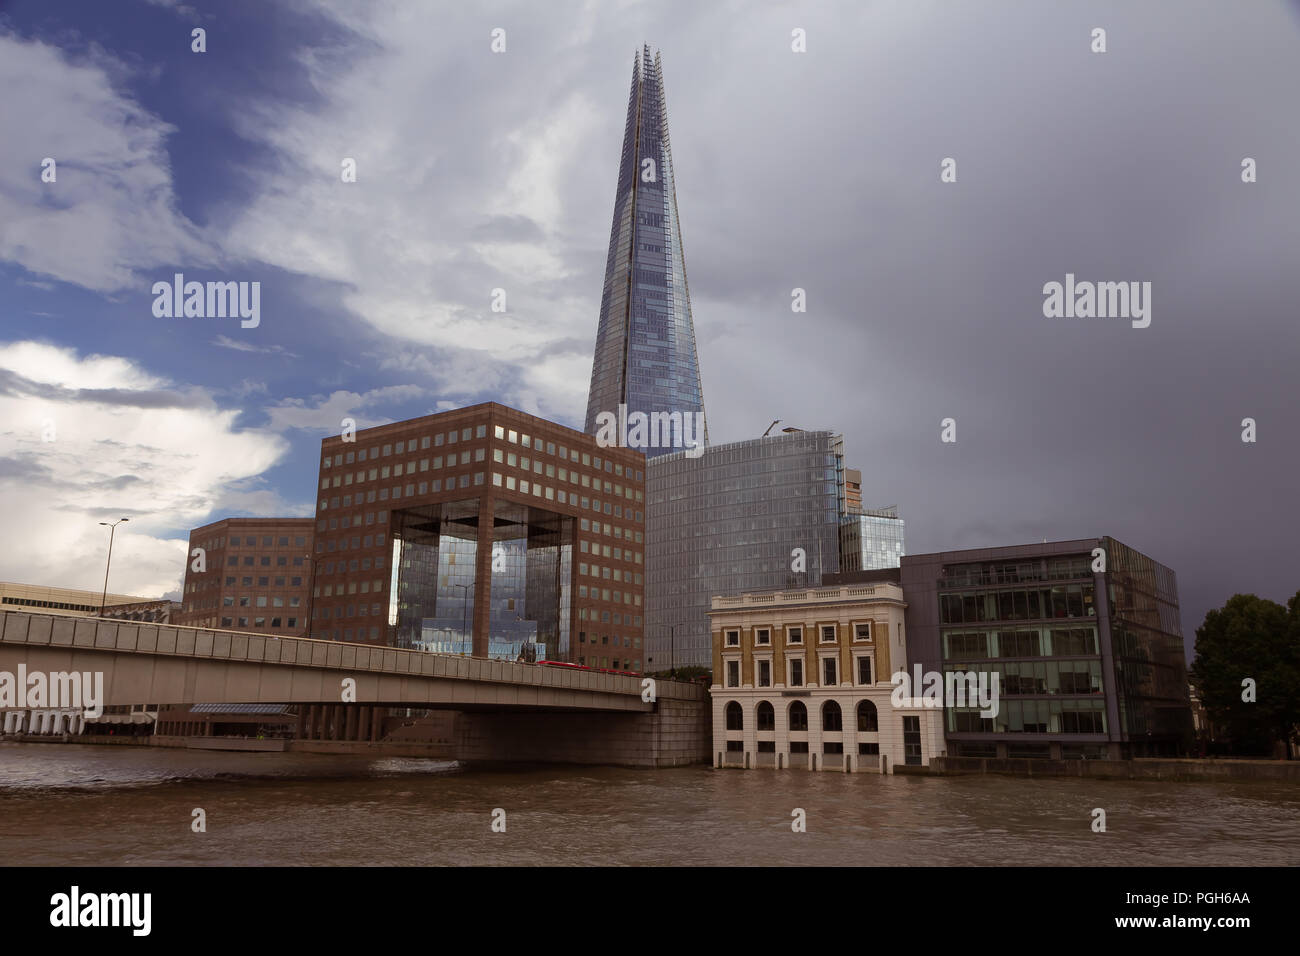 September 2017 - river view of the Shard skyscraper in London, UK, surrounded by modern cubic buildings Stock Photo